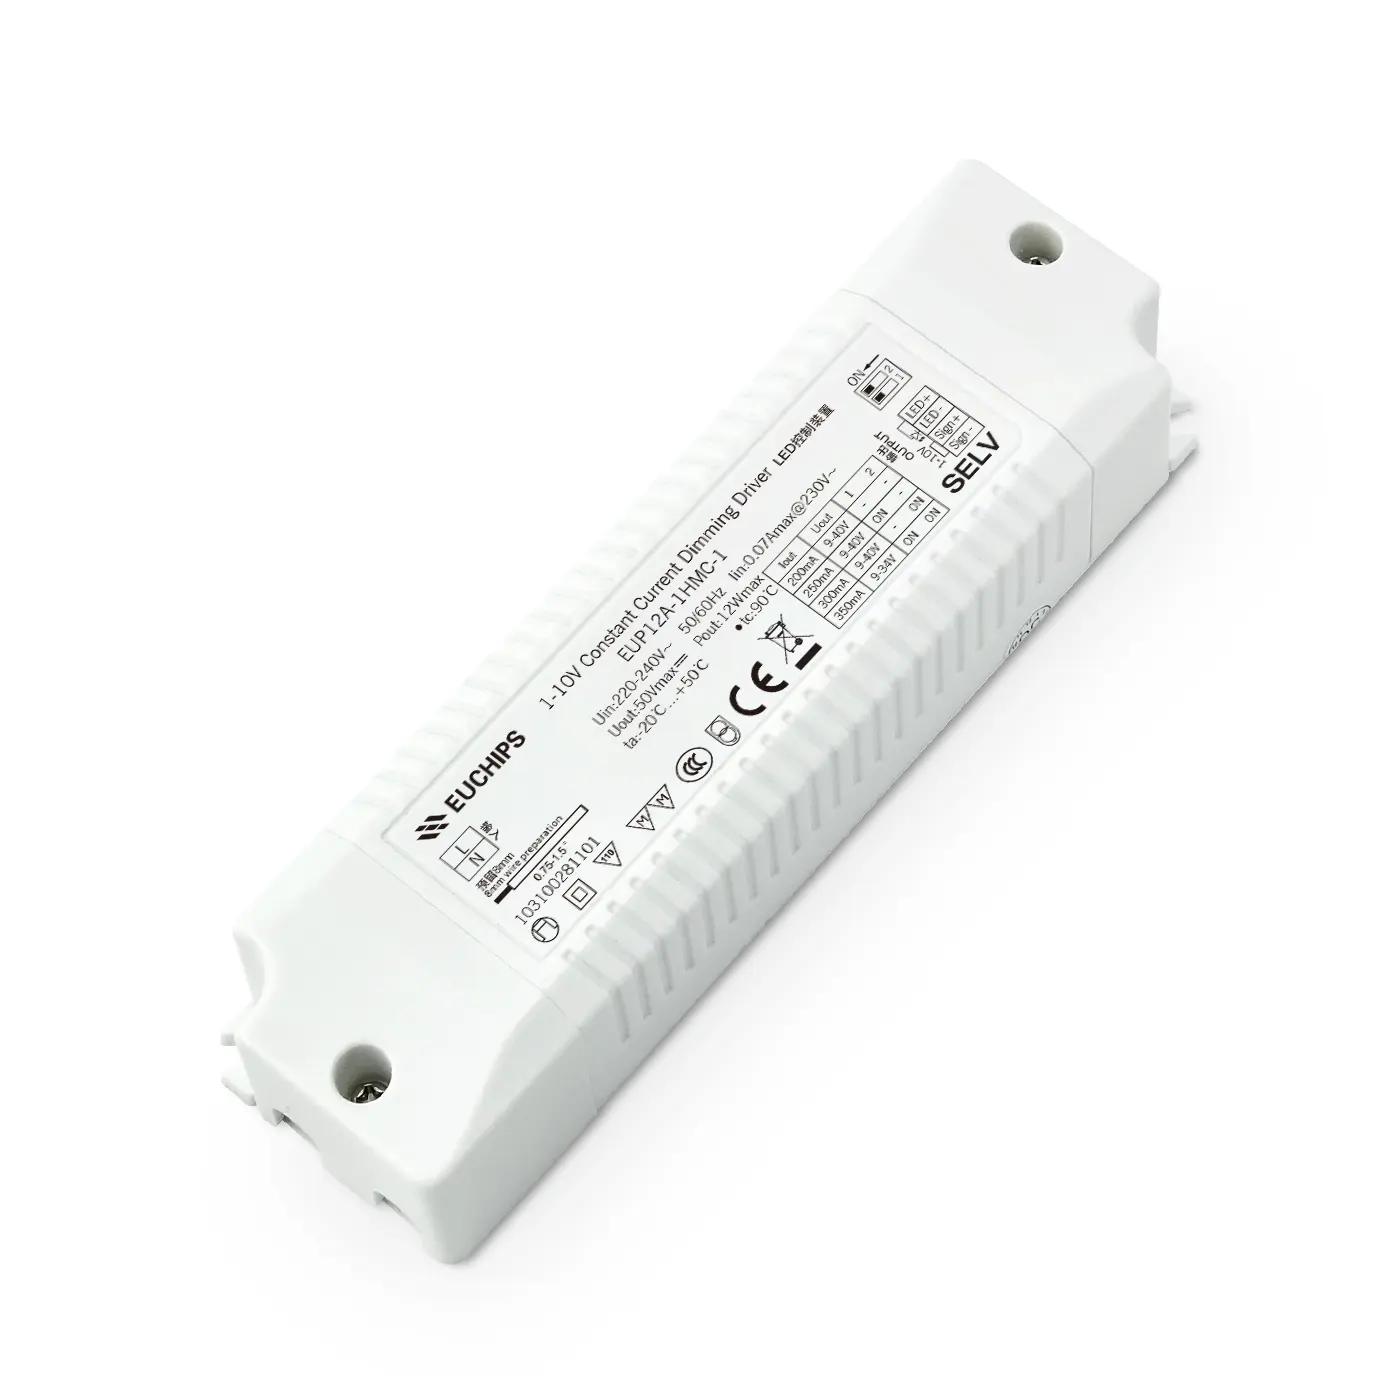 Class 2 Power Supply 0-10V Indoor Lighting Led 180~300mA Current 12W LED Dimming 0-10V Driver